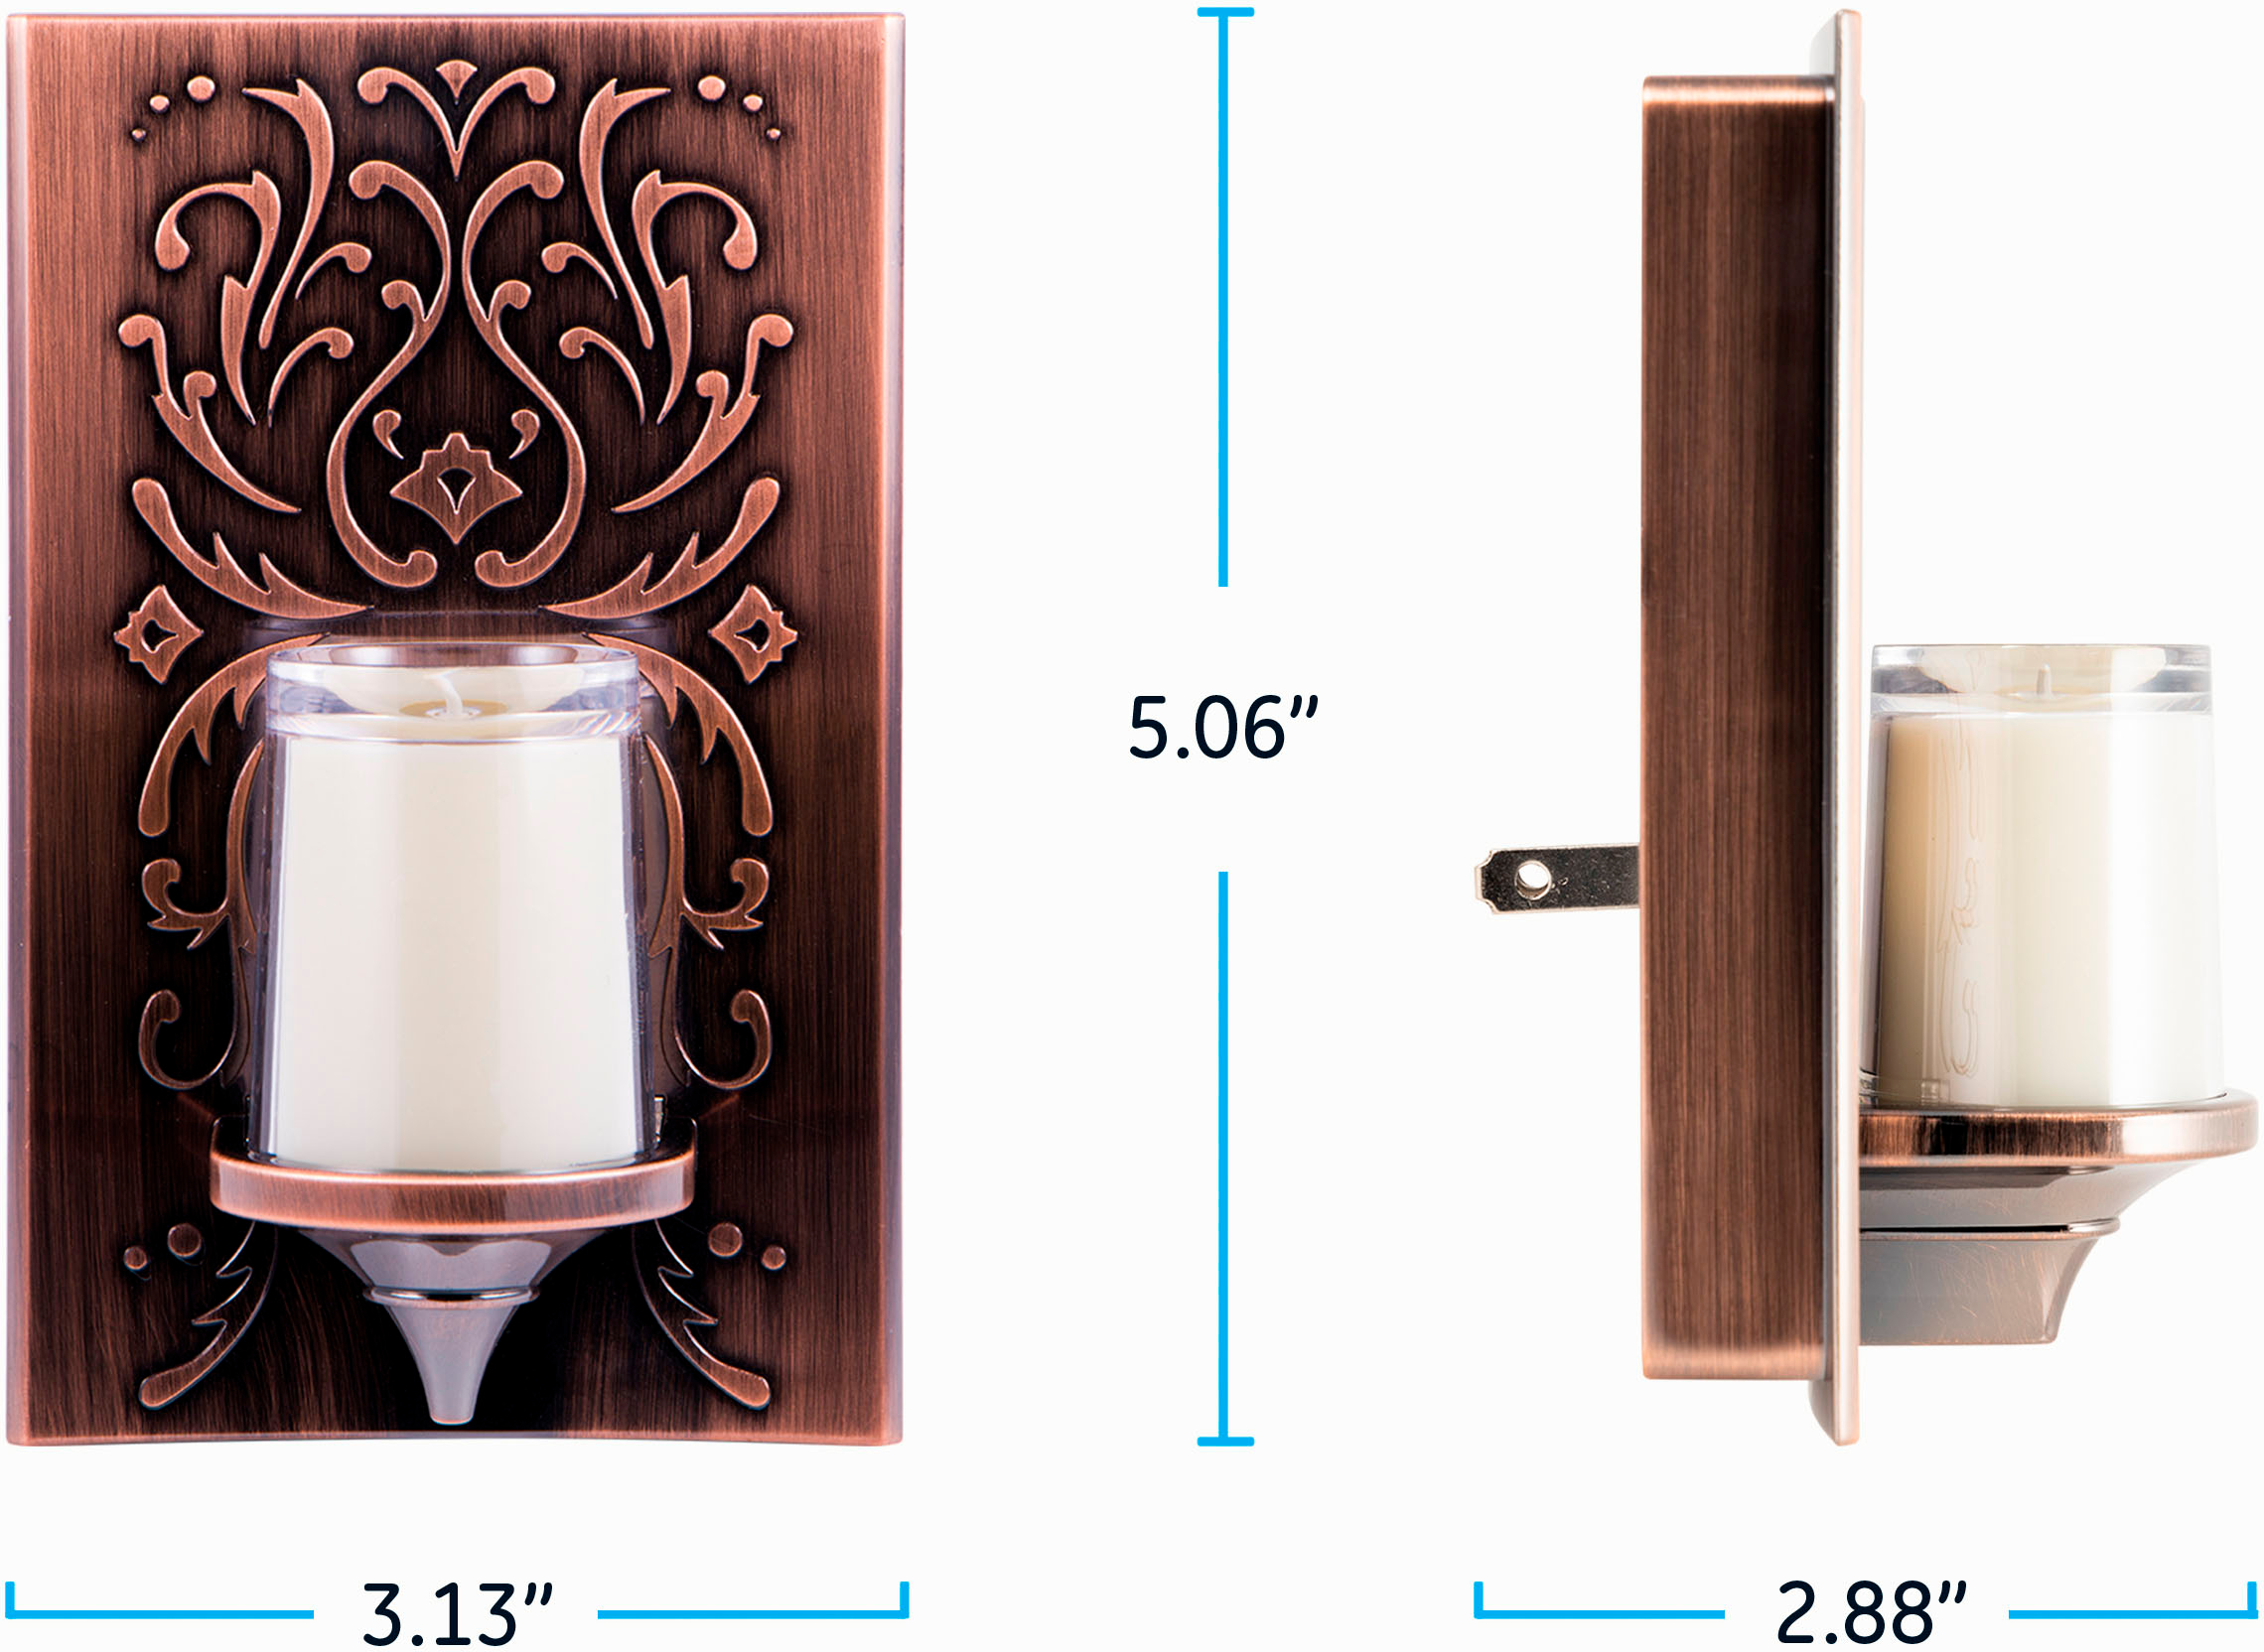 Angle View: GE - CandleLite LED Flickering Candle Night Light - Rubbed Bronze